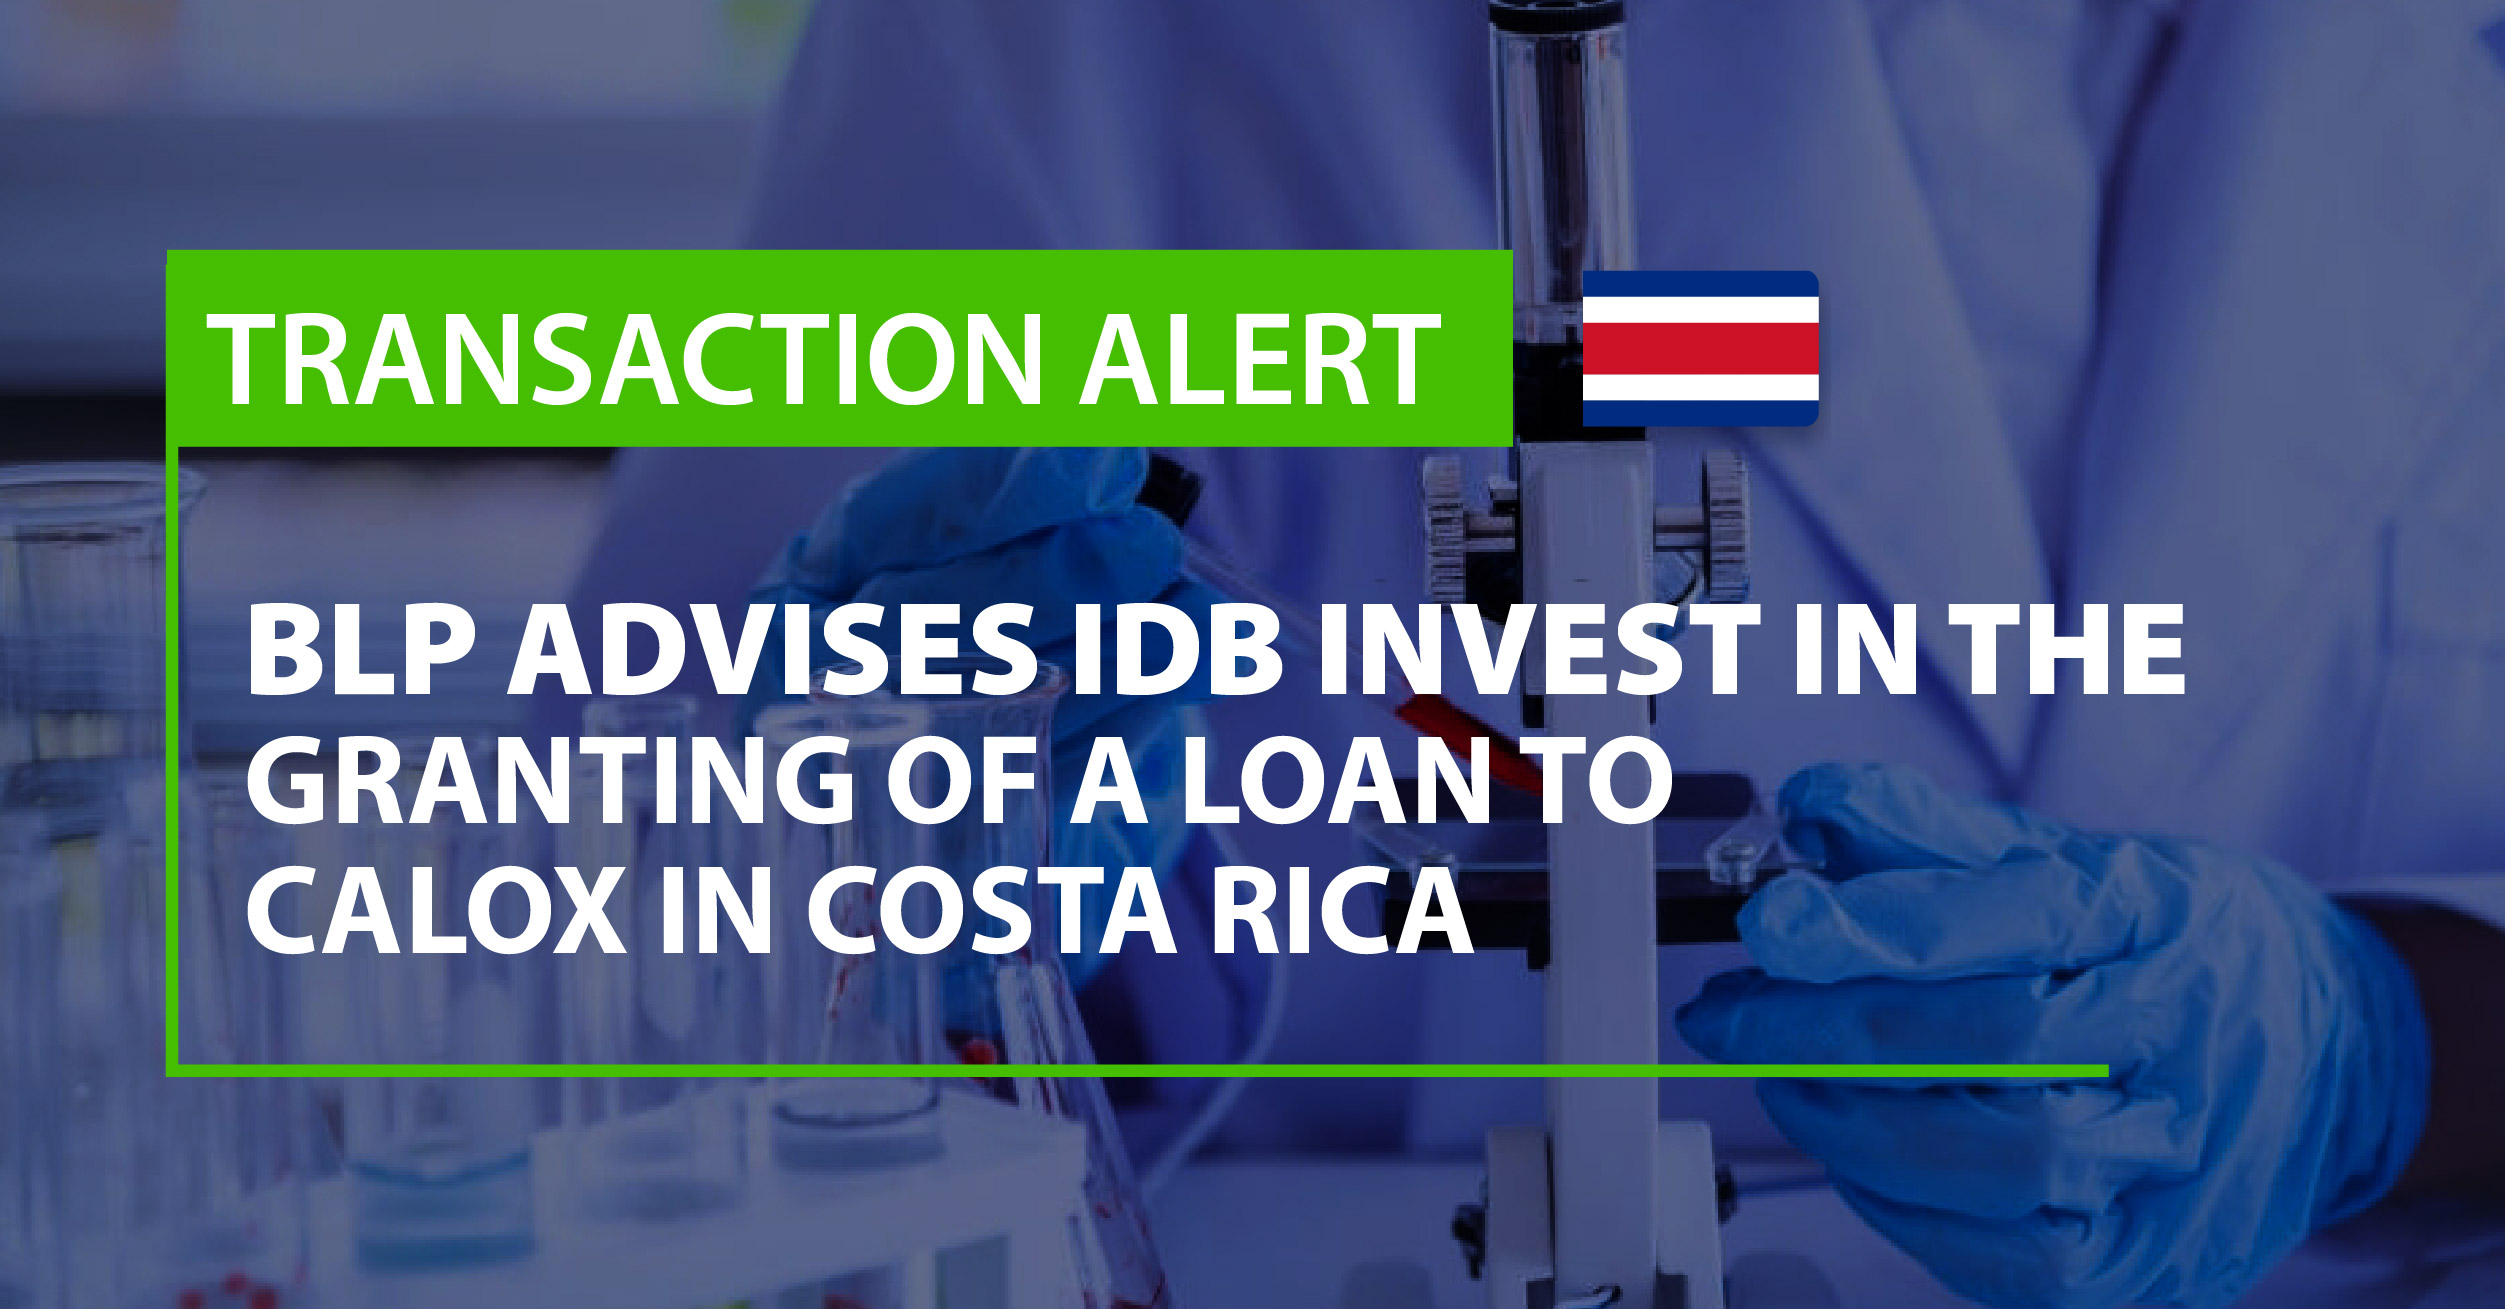 BLP advises IDB Invest in the granting of a loan to Calox de Costa Rica